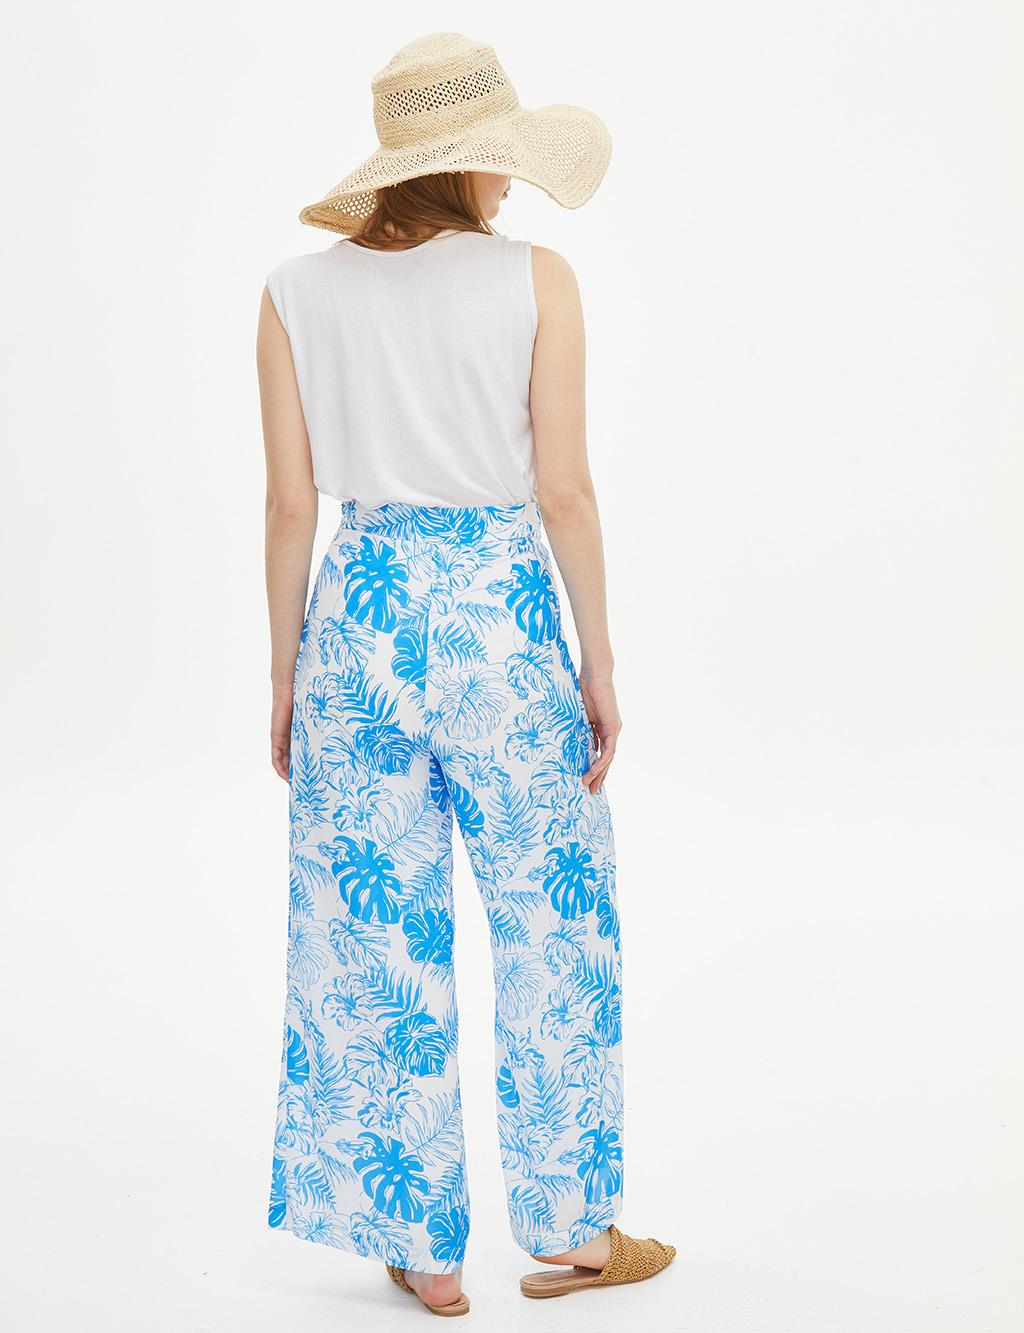 Pleated Wide Leg Floral Patterned Pants Blue